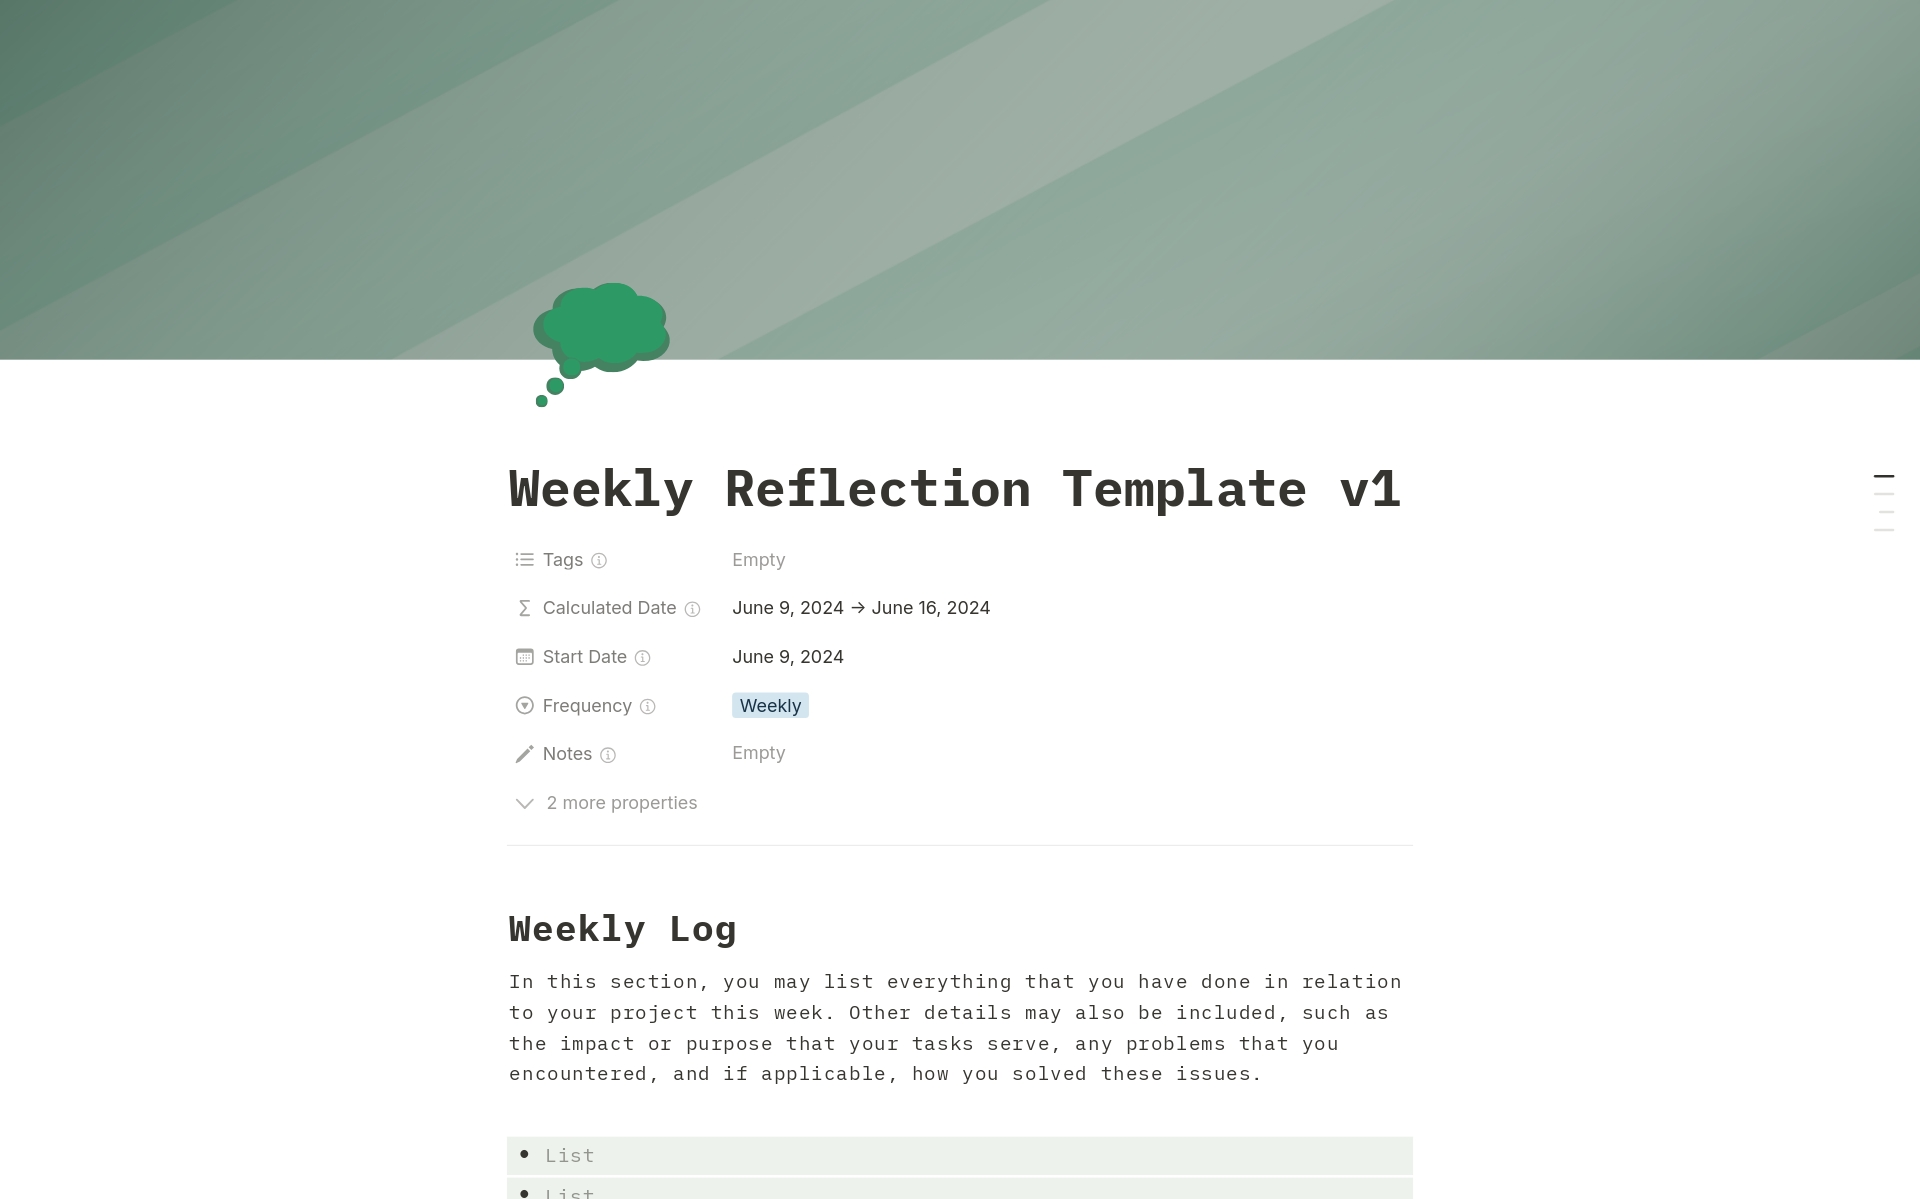 The Developer Organizer Template contains everything that I use in my web development projects. I created this template with the intent of promoting a purposeful and content development process and overall lifestyle.